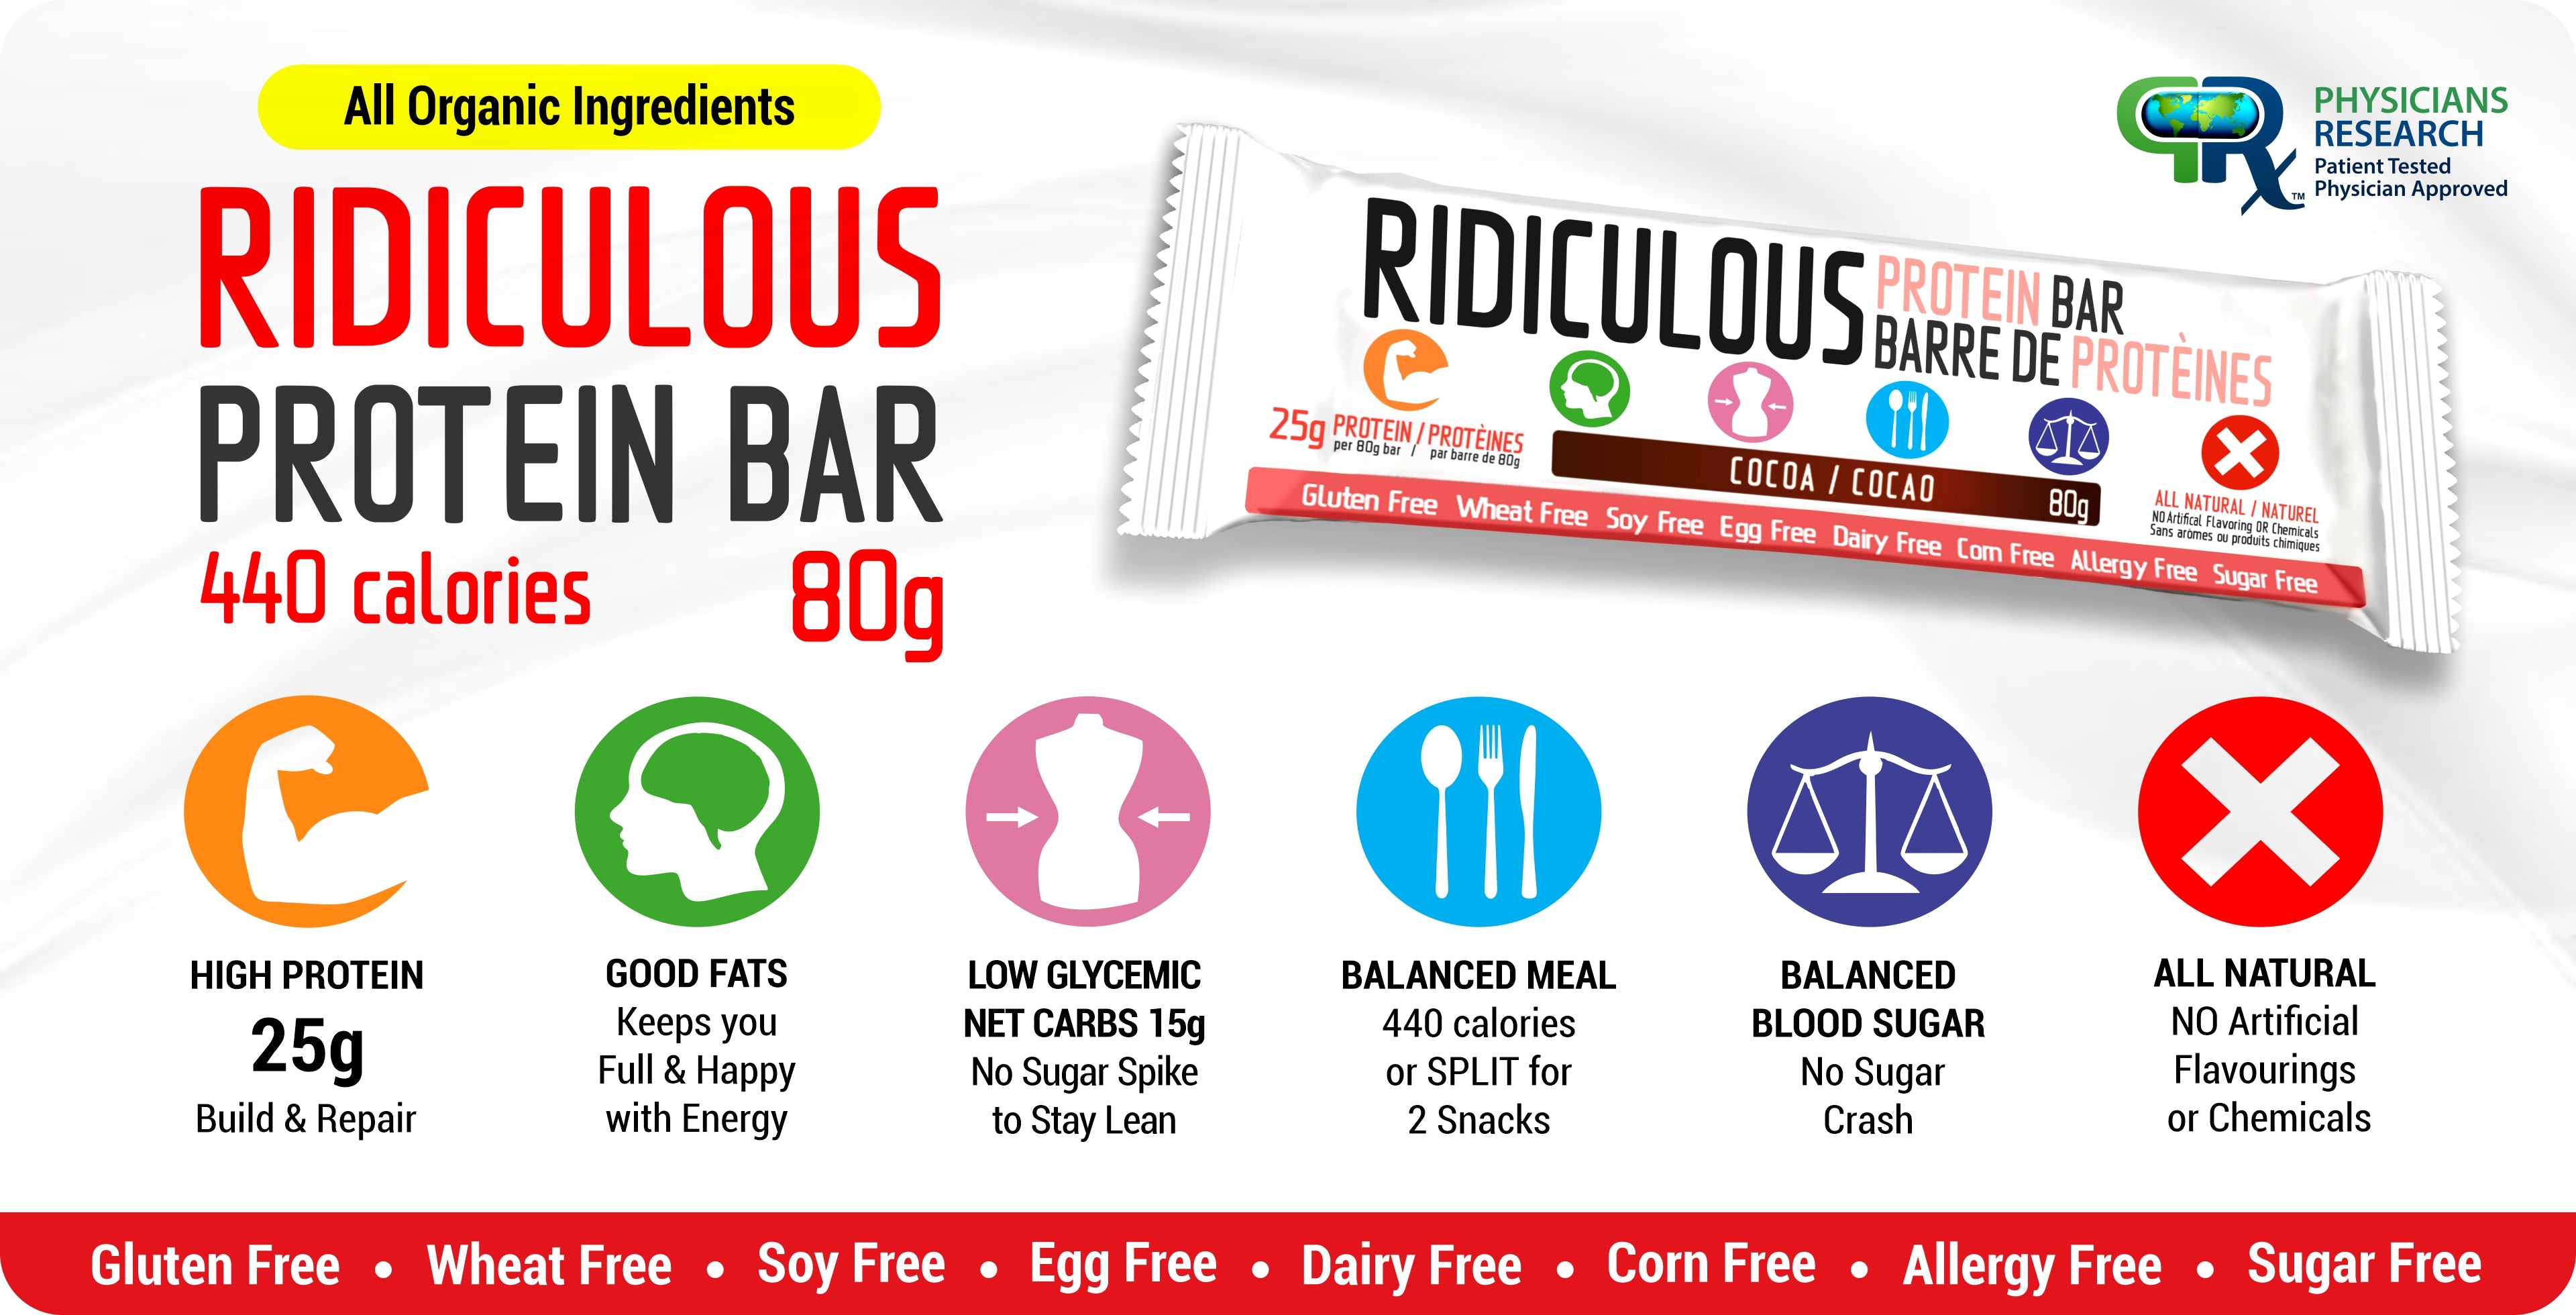 Ridiculous Meal Bar Vegan, Allergy-Free, High Protein, Low Carb, Paleo, Keto